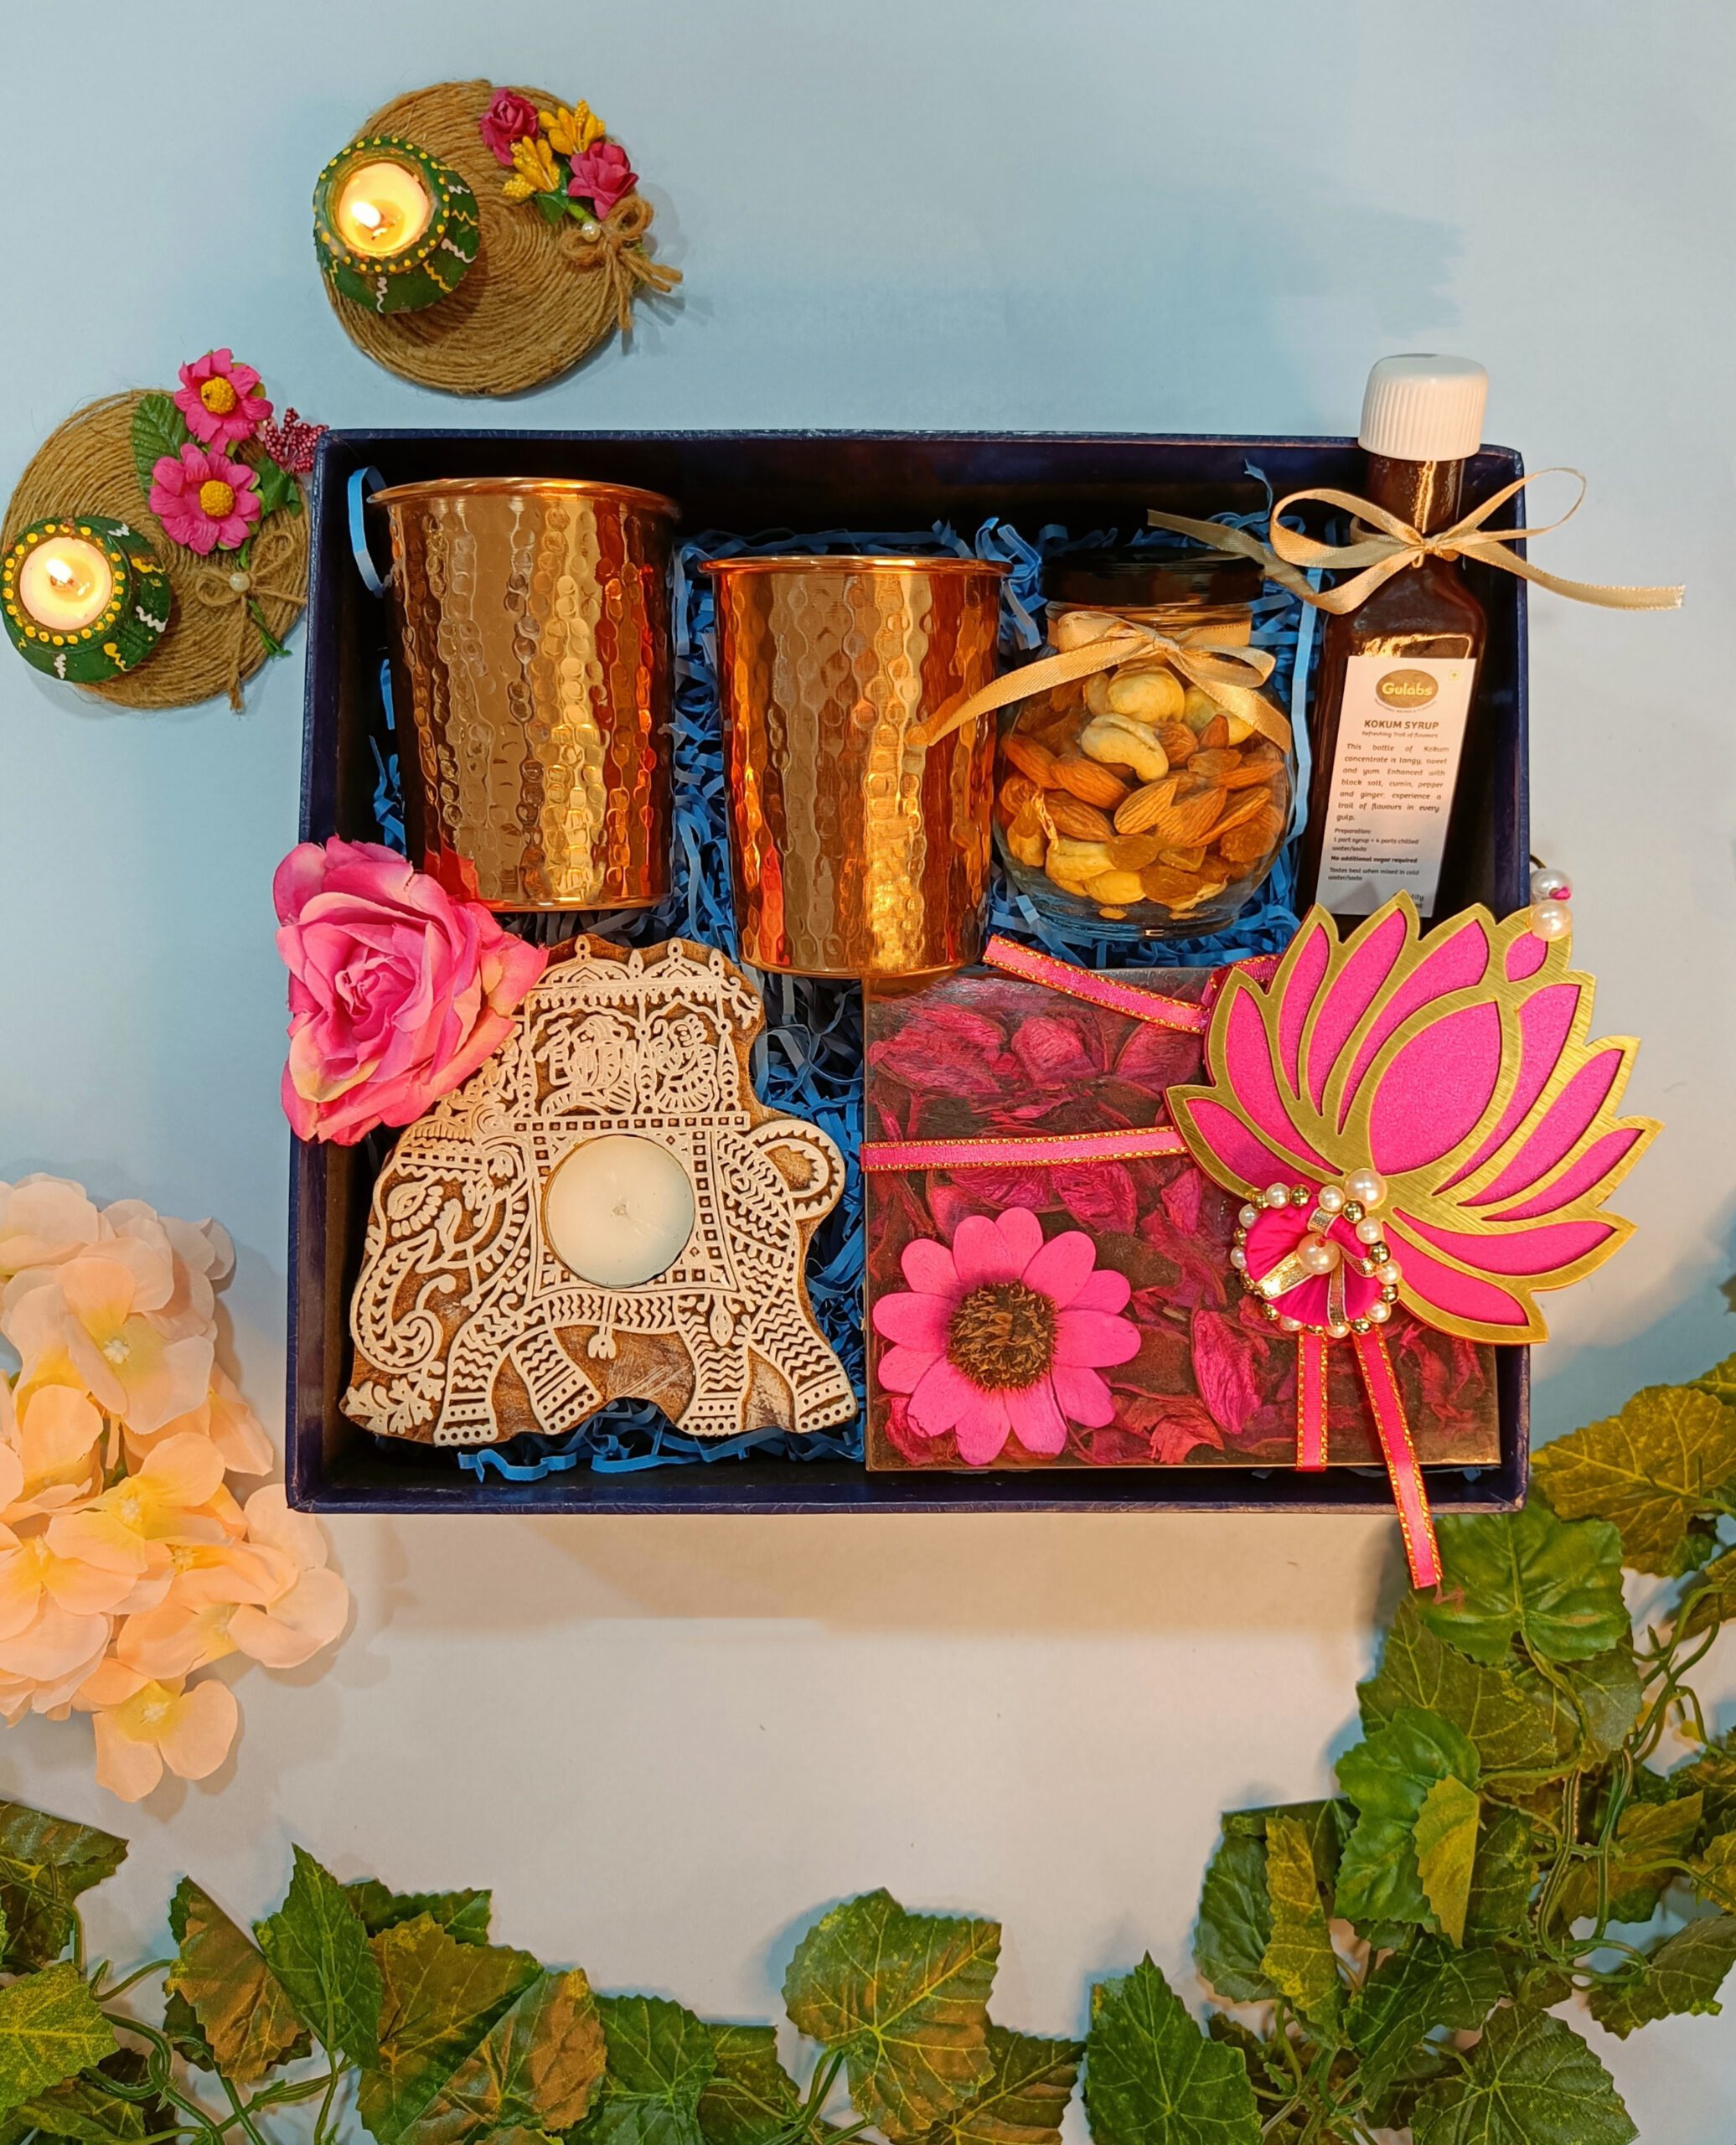 Indian Gift Hampers